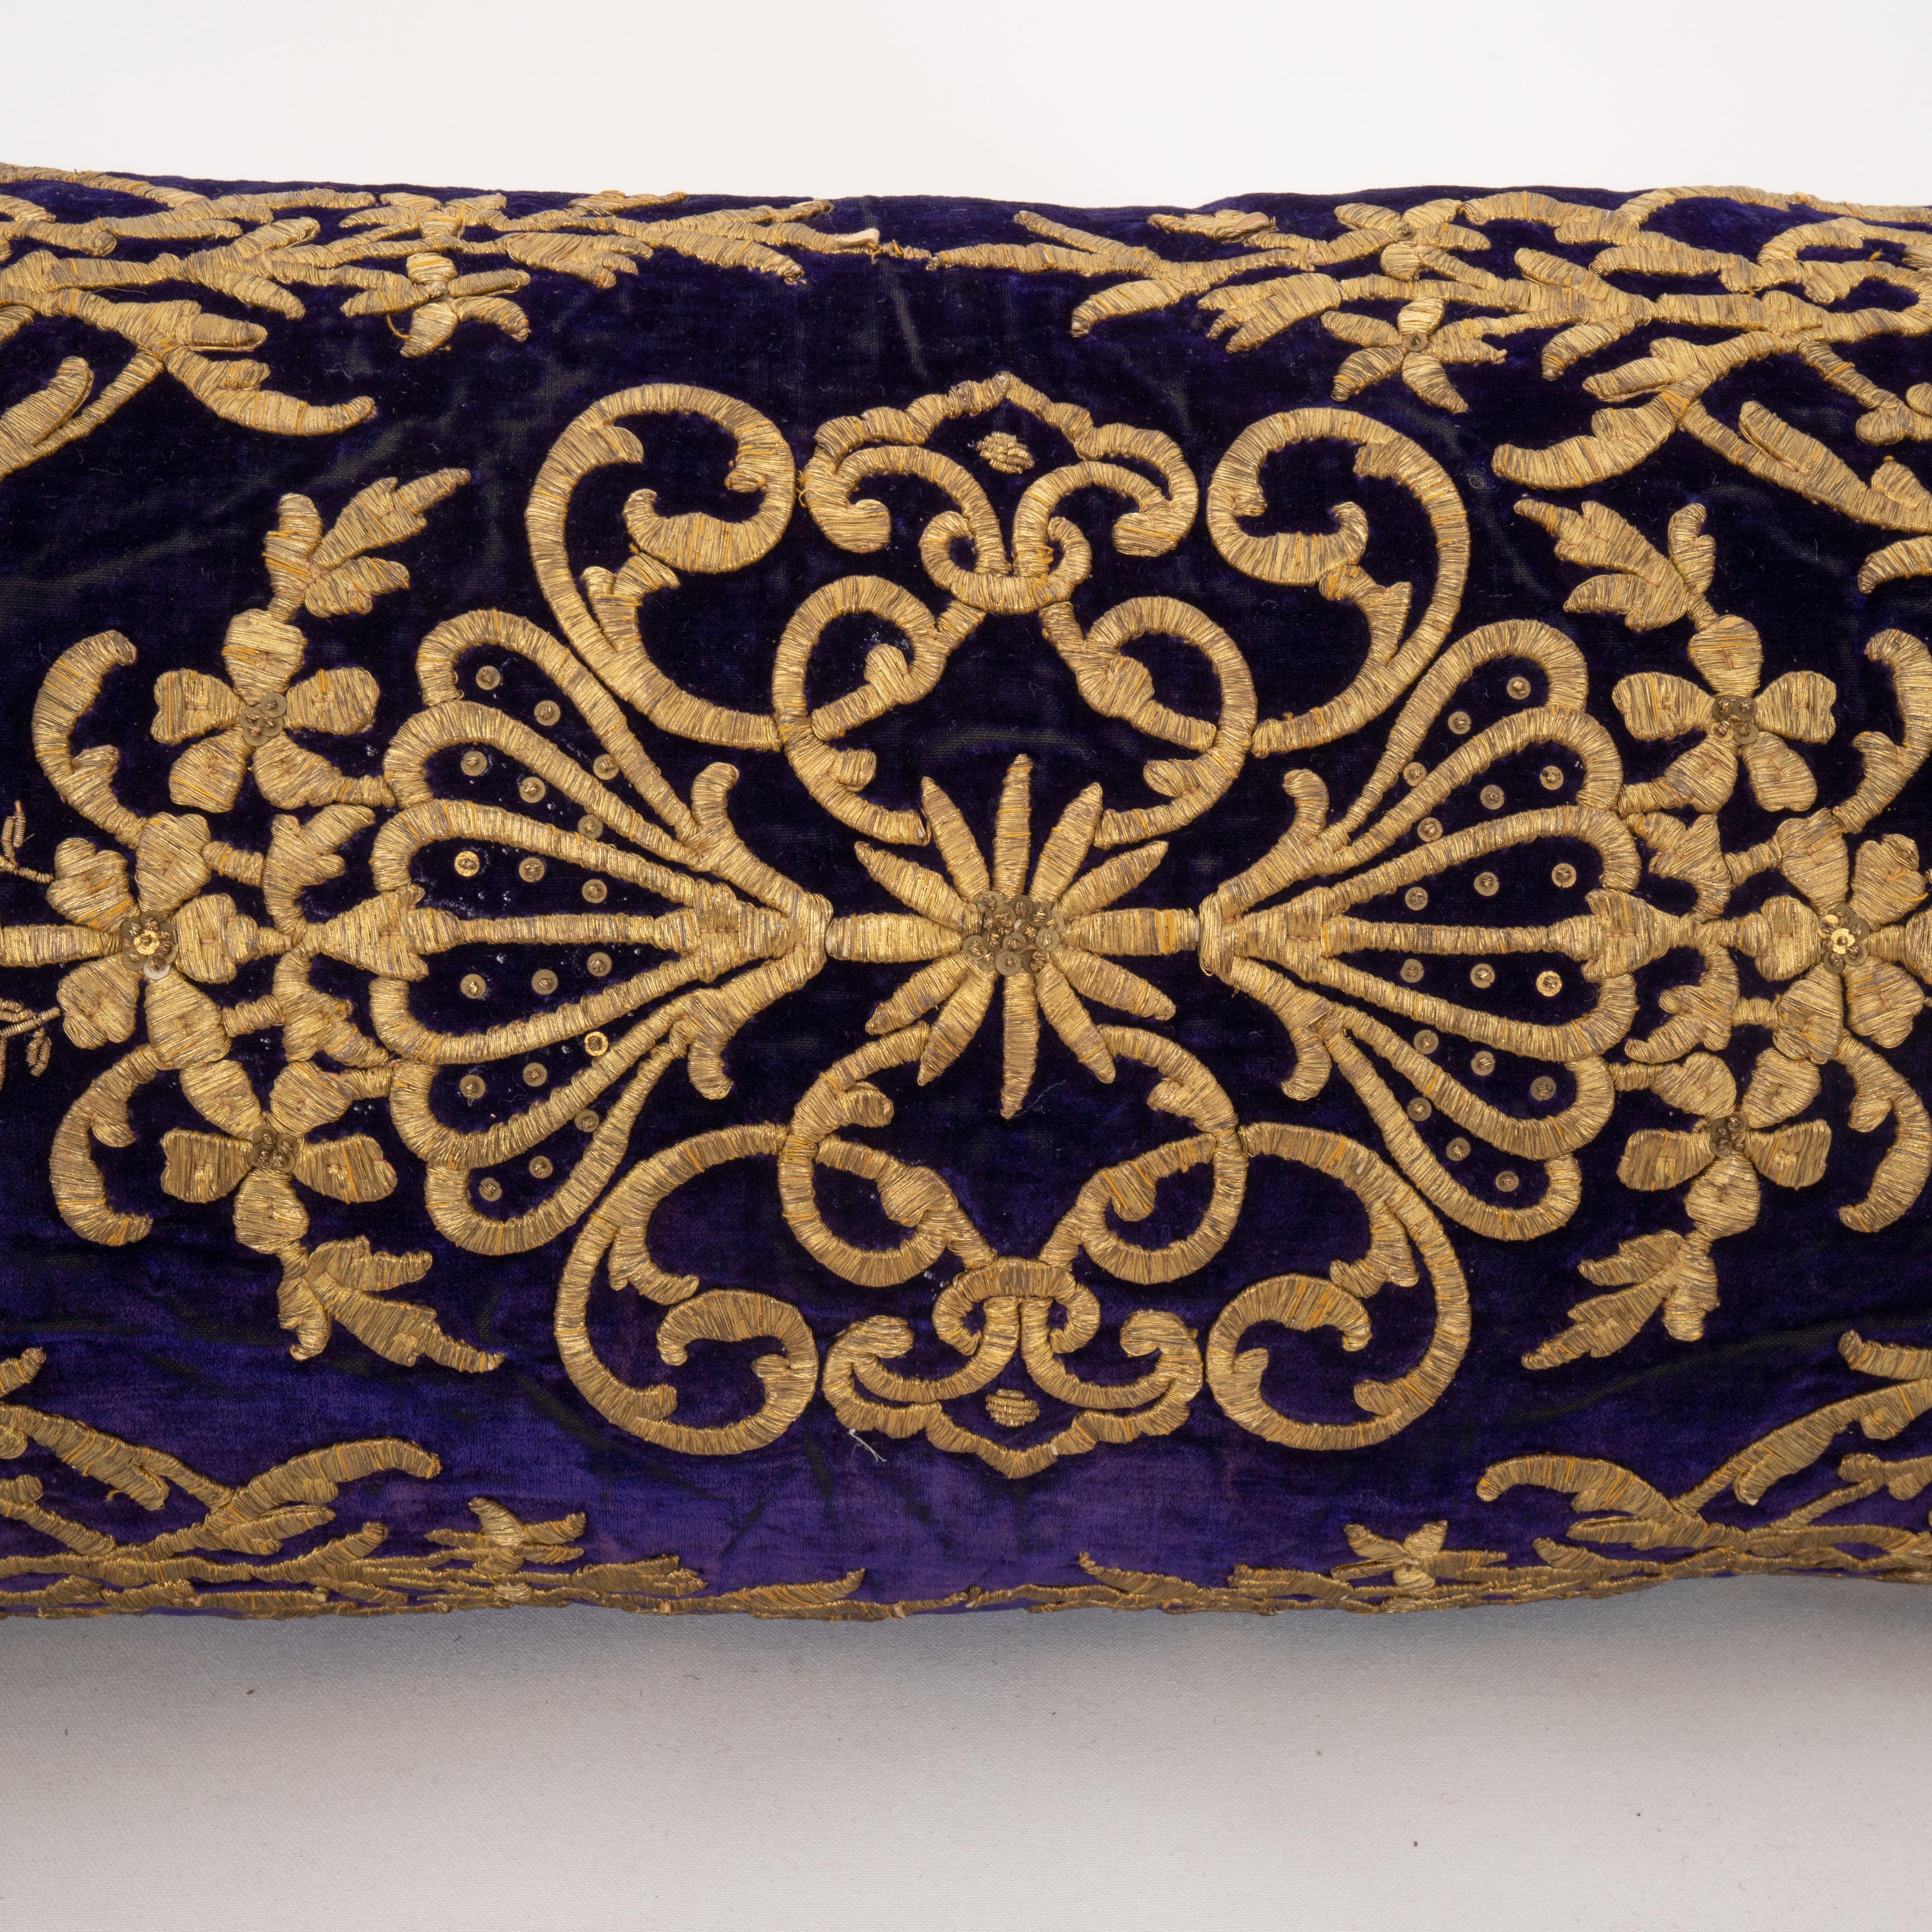 Ottoman / Turkish Pillow Cover in Sarma Technique, late 19th / Early 20th C. In Good Condition For Sale In Istanbul, TR